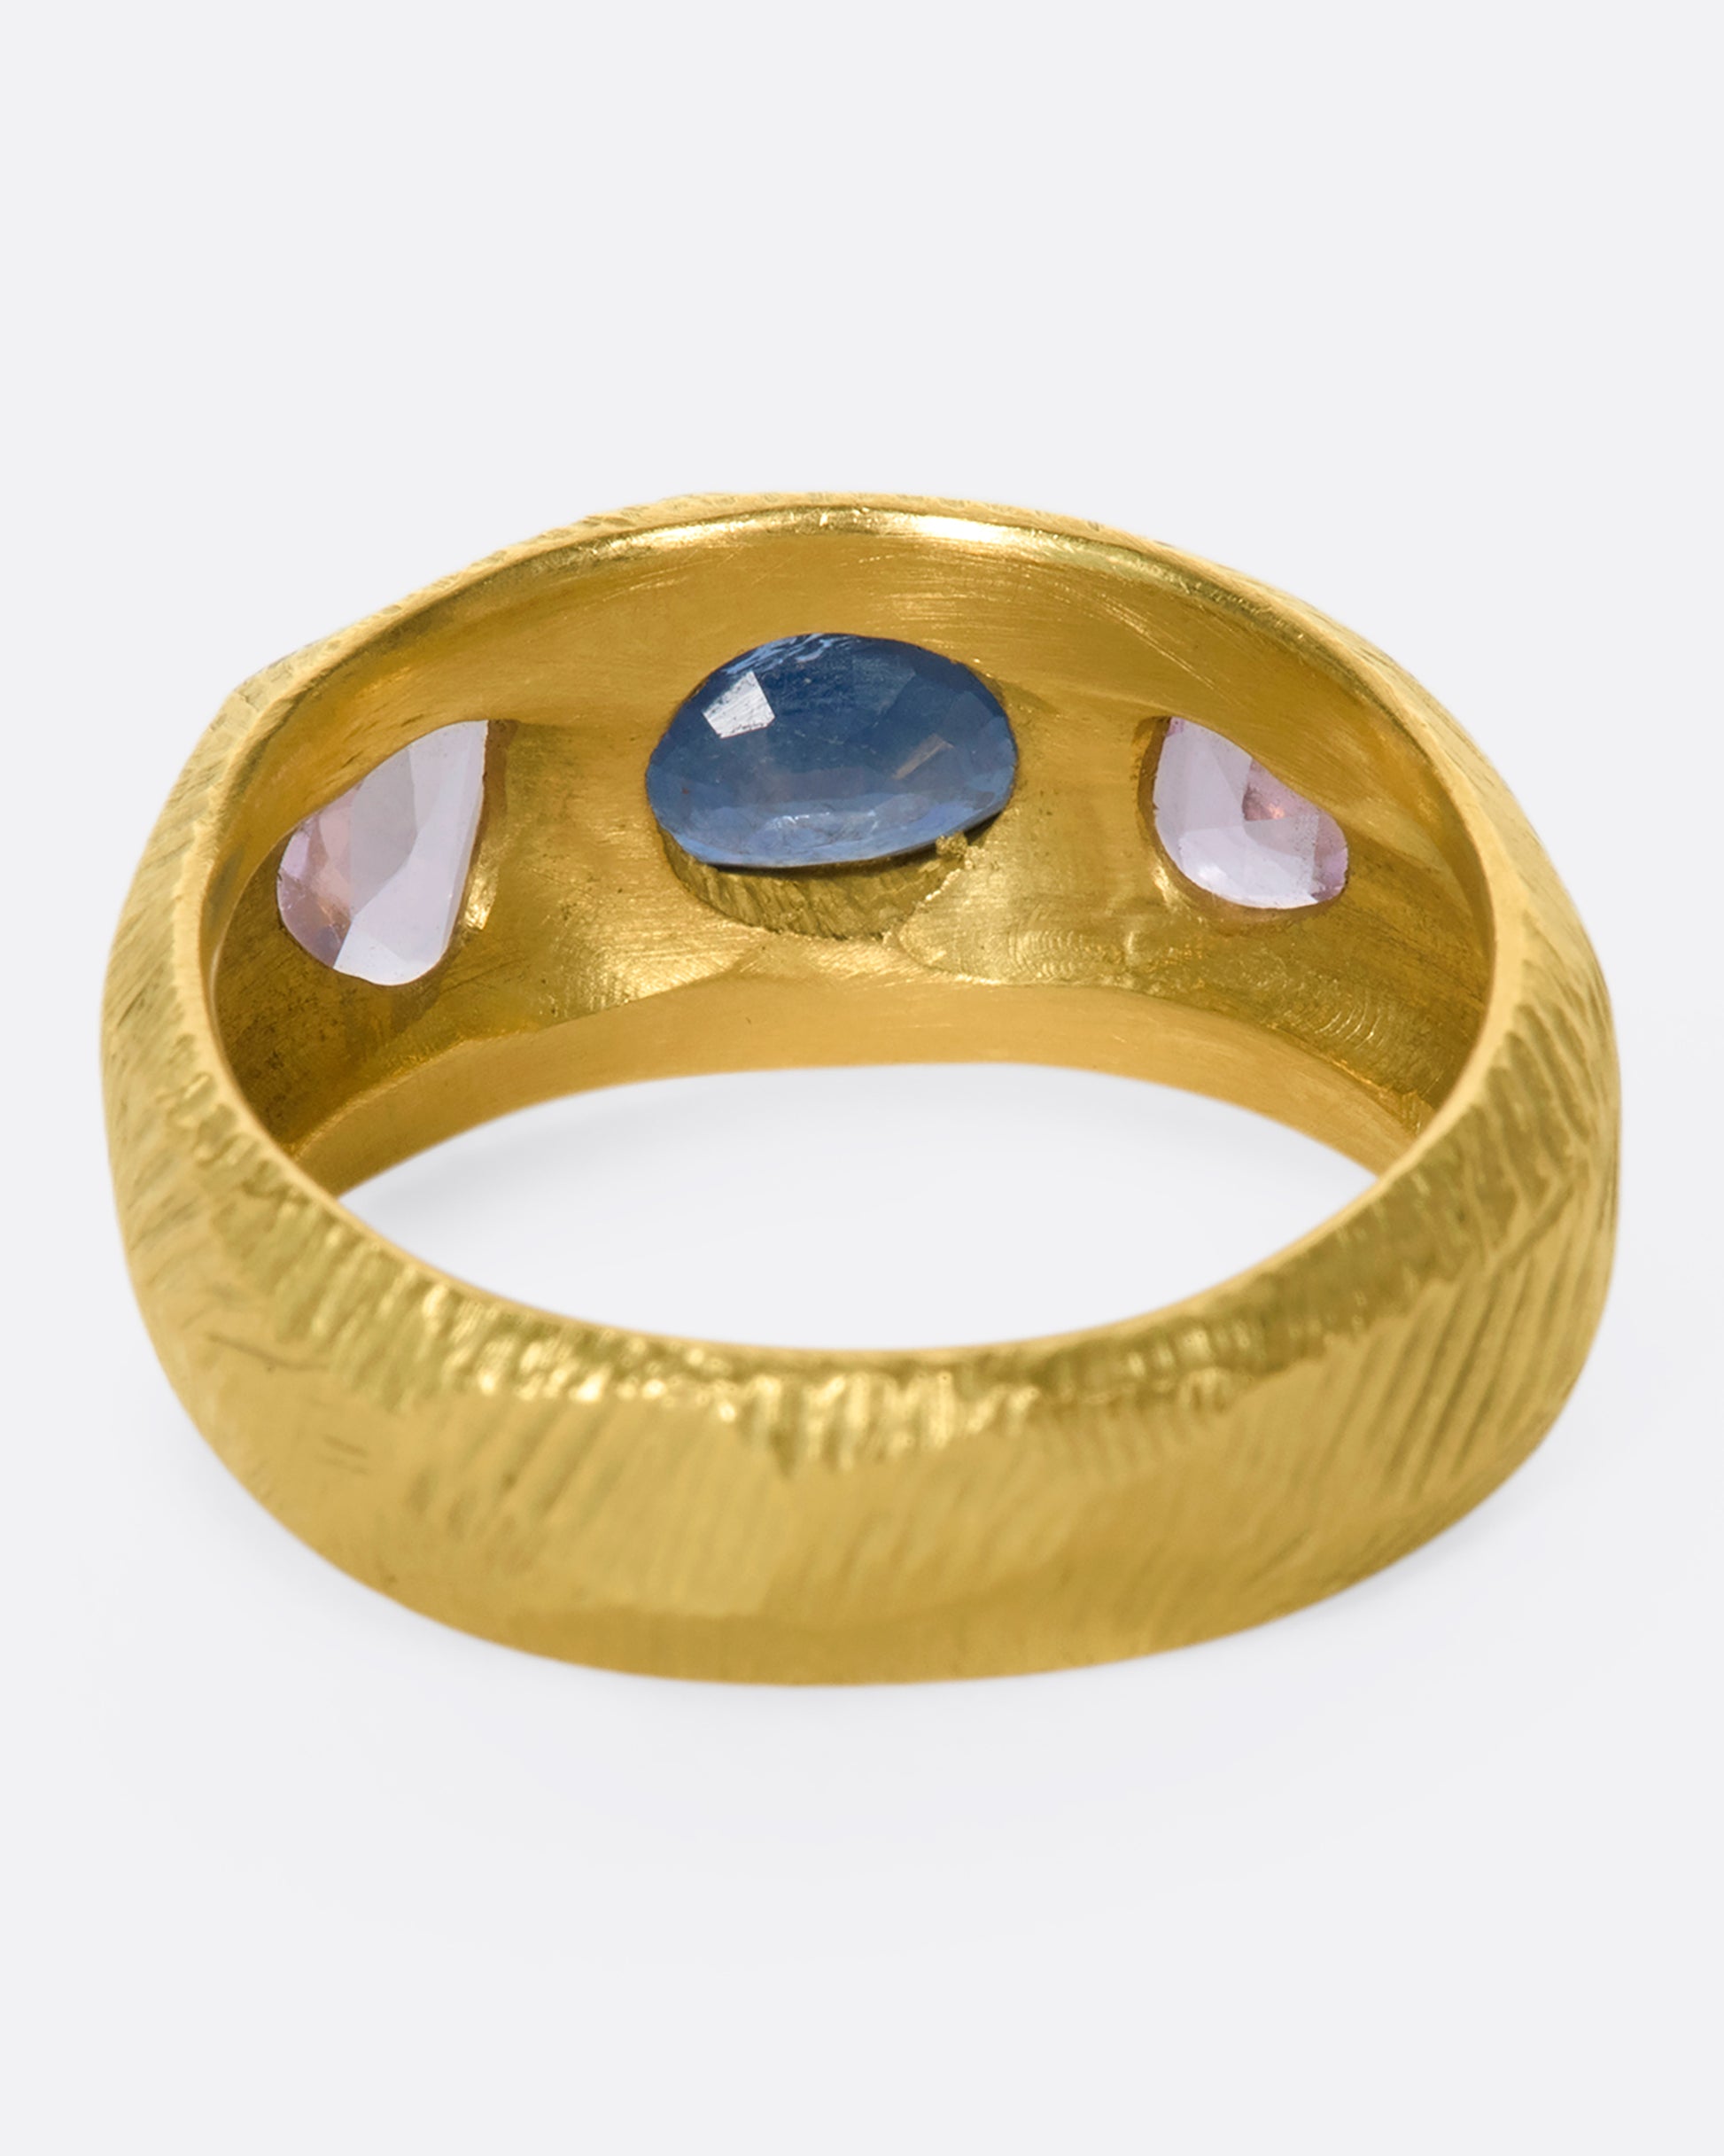 This hand carved 18k gold band is inlaid with an oval blue sapphire, flanked by beautiful pink sapphires